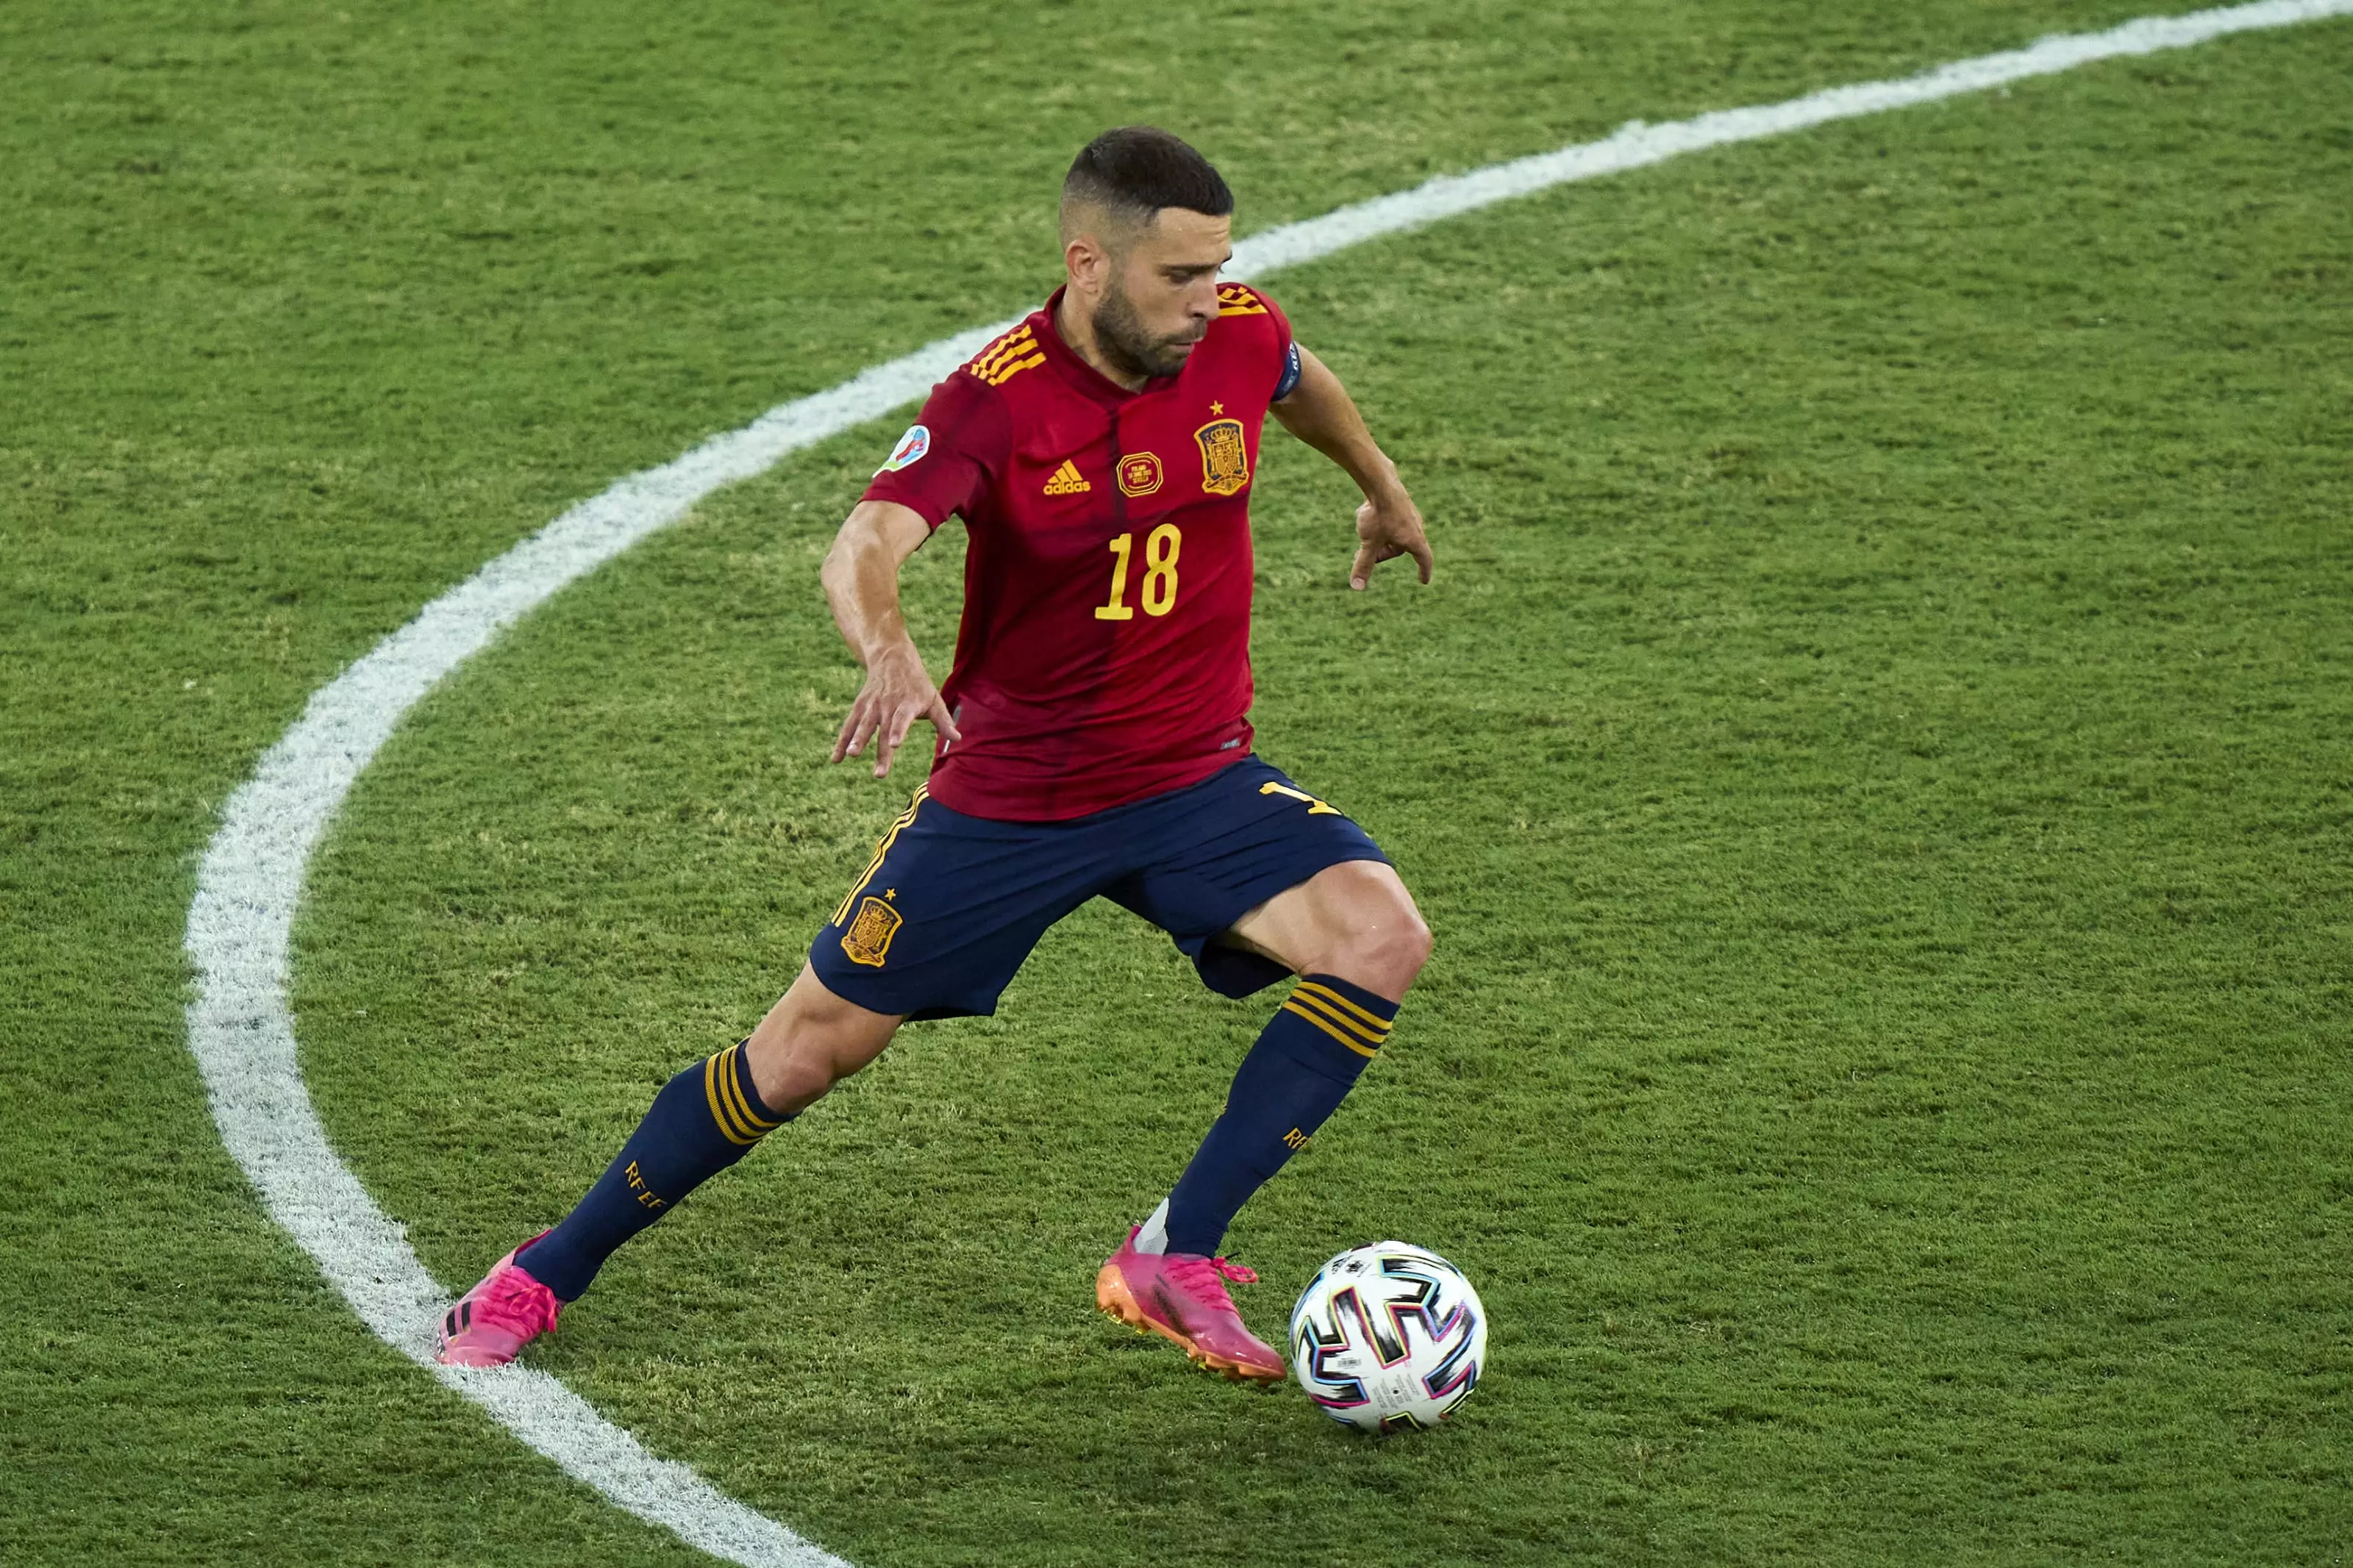 Jordi Alba reached the Euro 2020 semi-final with Spain this summer (Image: PA)